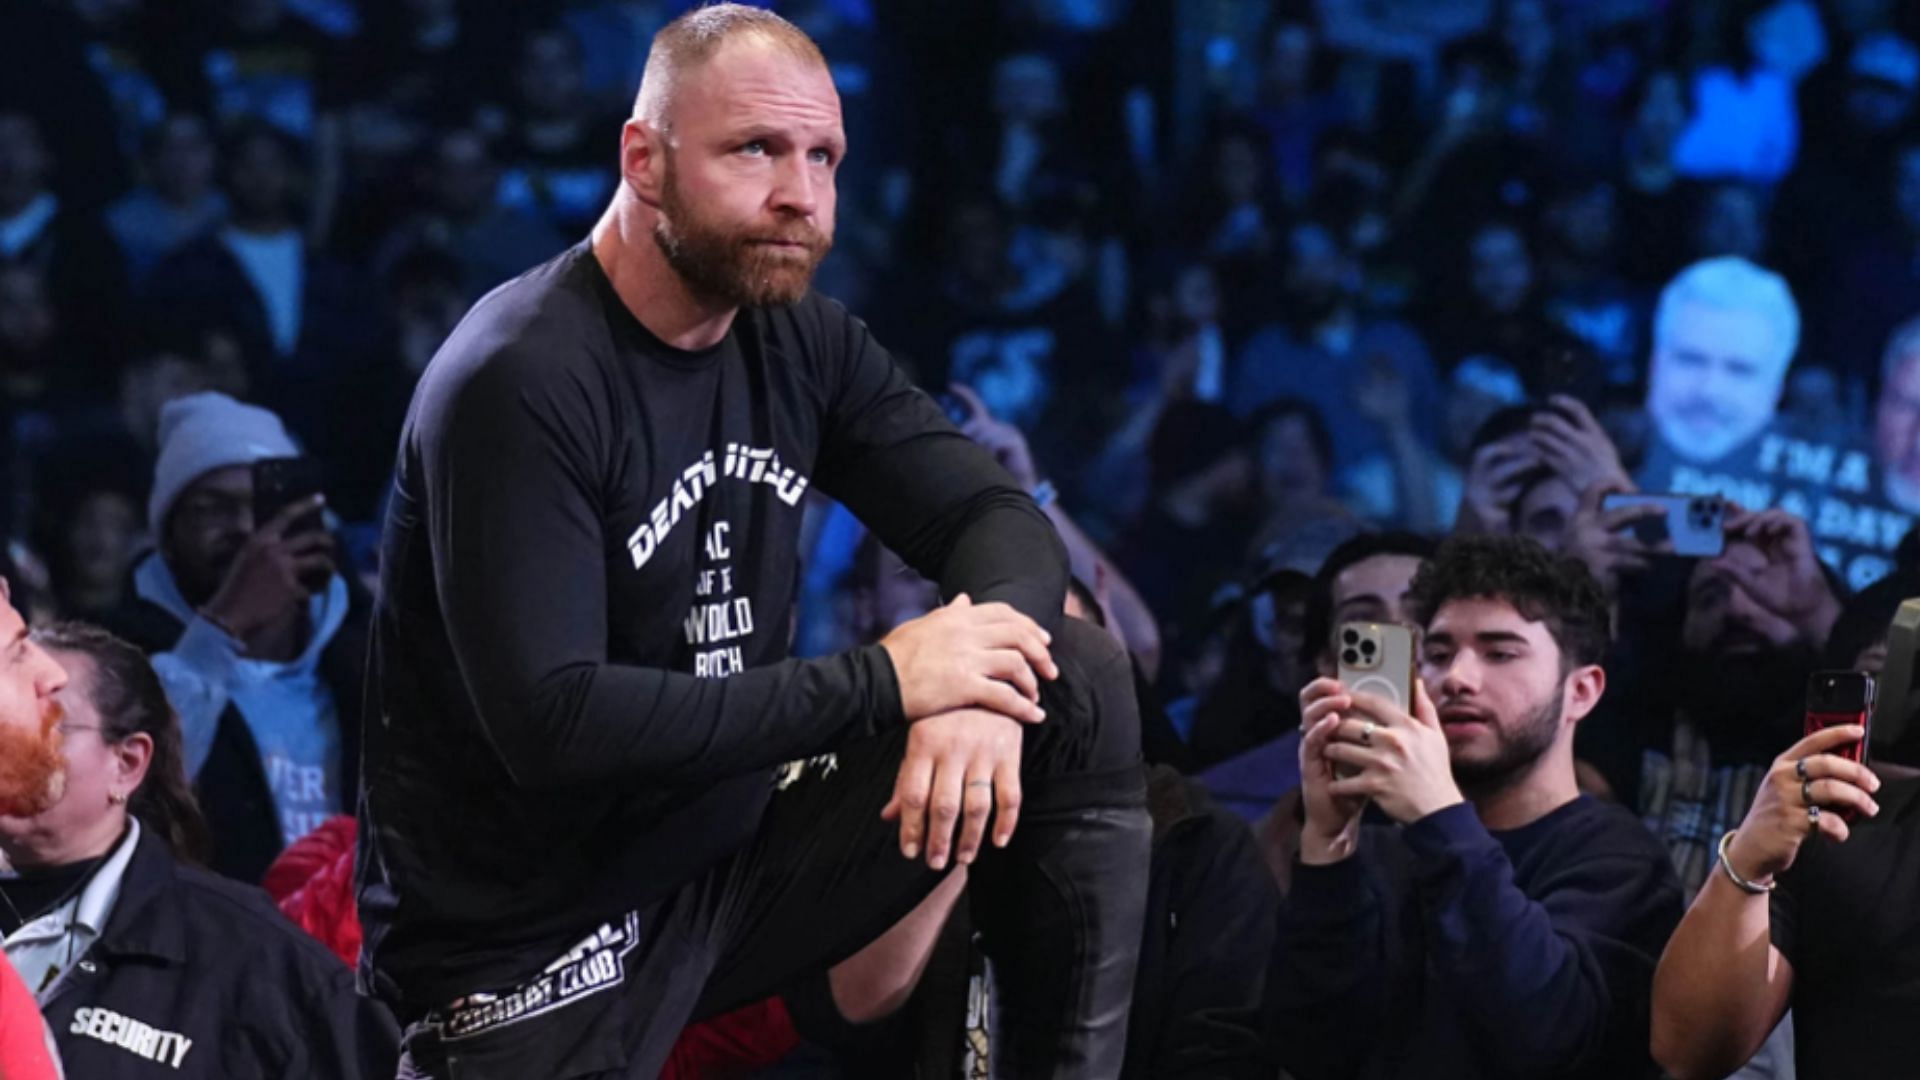 A top AEW champion shared heartfelt words for Jon Moxley